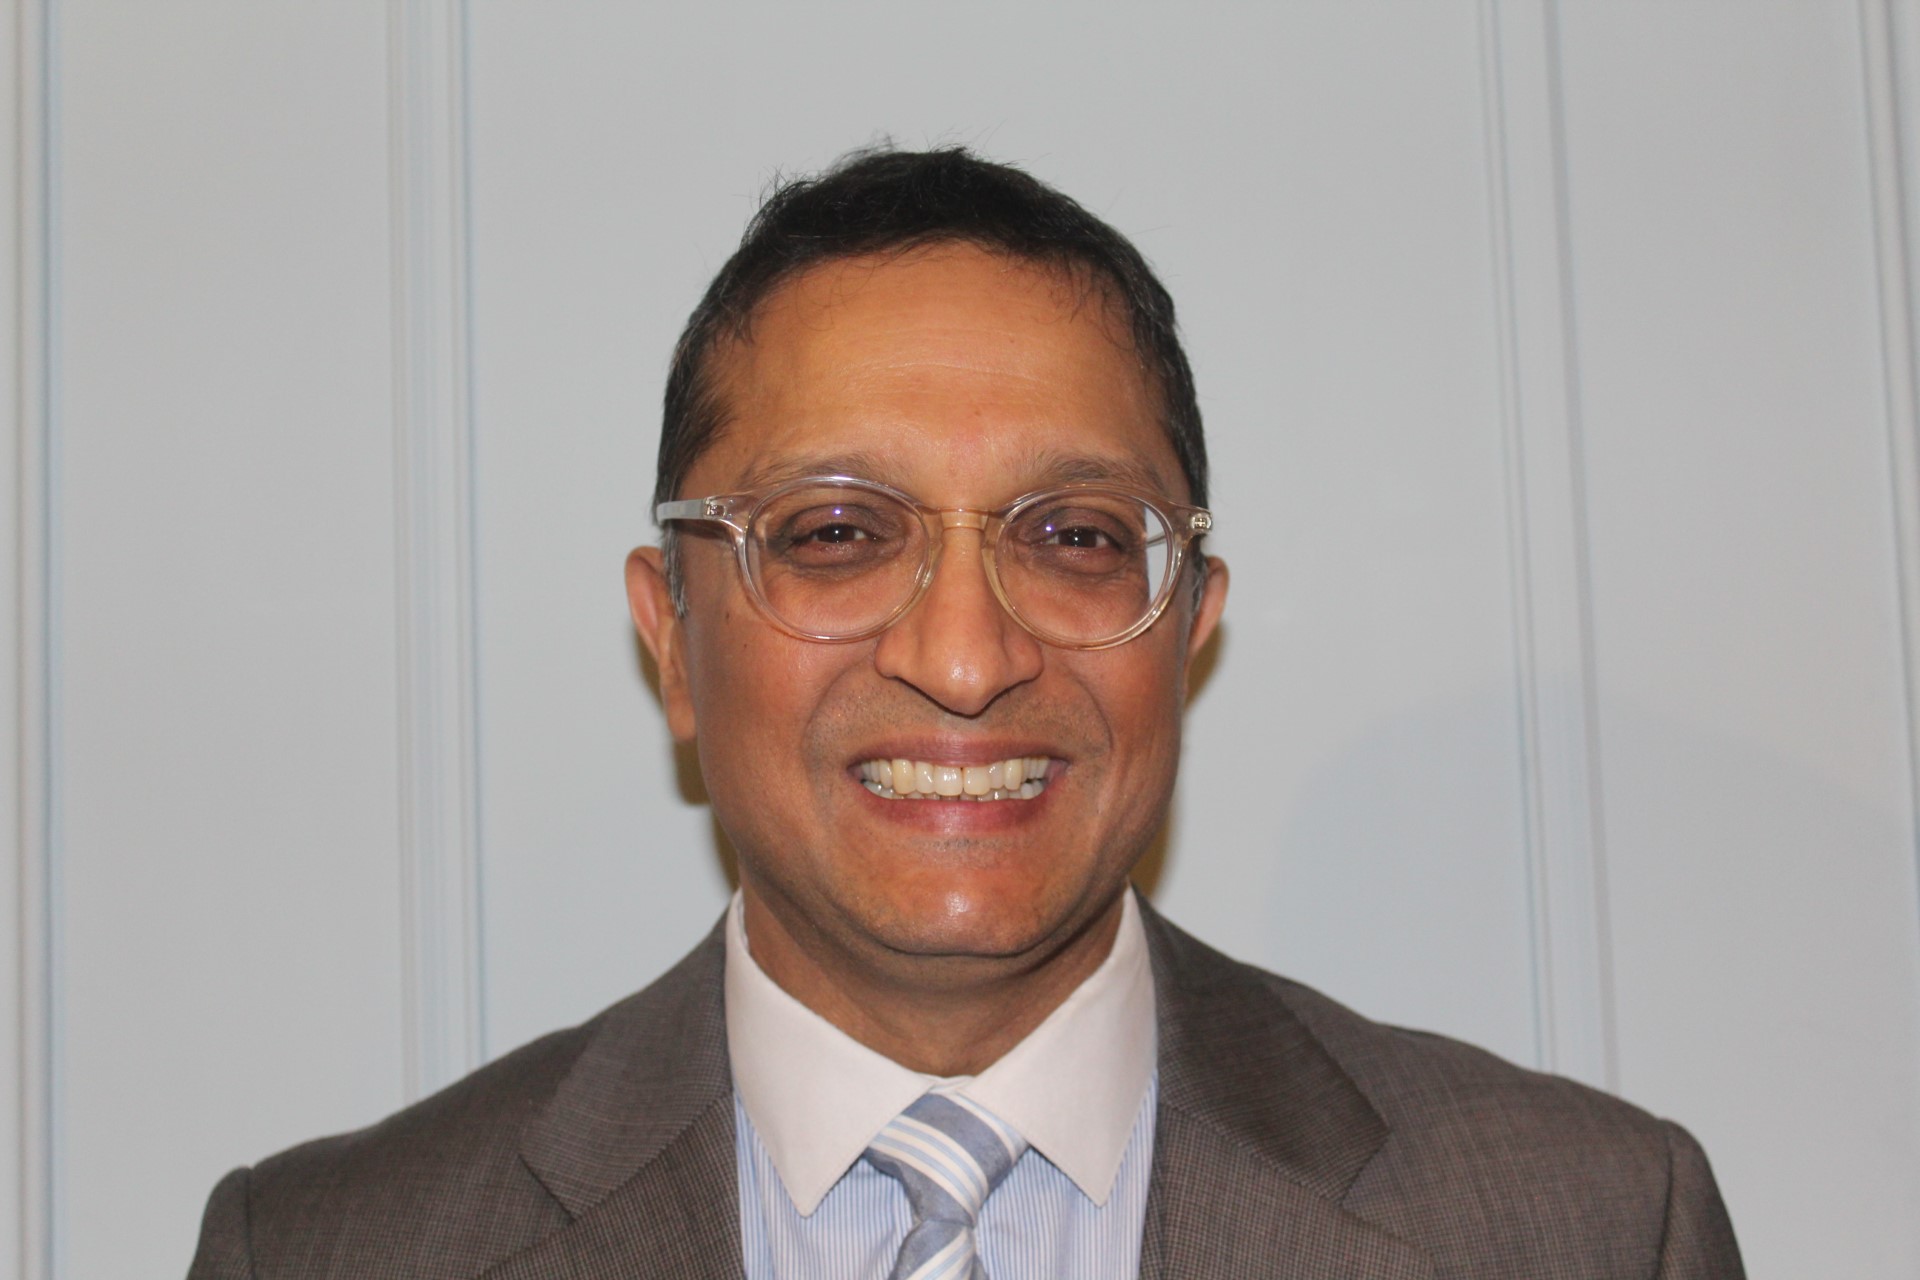 Mr Gupta, Cataract Surgeon, Medical Retina Specialist at My Eye Clinic. He specialises in cataract surgery and treatment of macular degeneration.